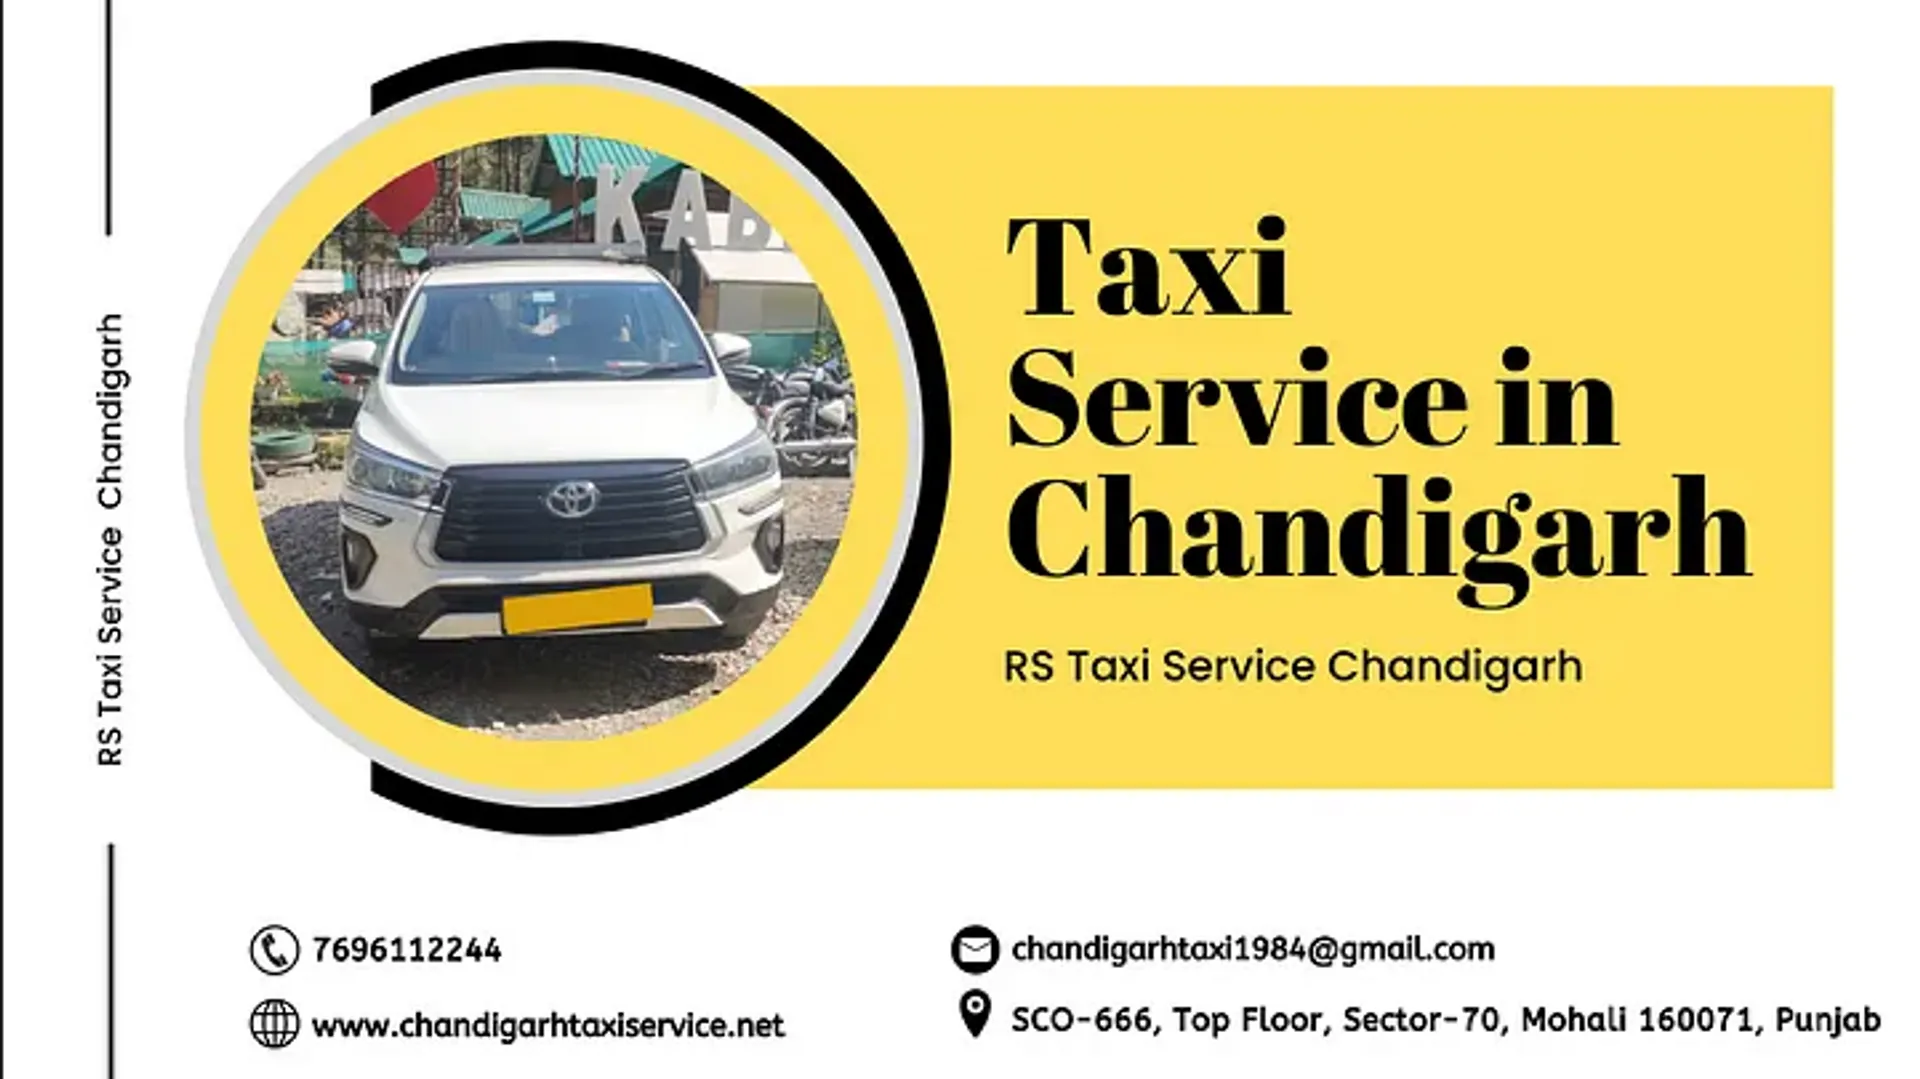 Welcome to RS Taxi Service Chandigarh - Your Trusted Taxi Service in Chandigarh. 

When it comes to reliable and convenient transportation in Chandigarh, RS Taxi Service is your ultimate choice. We take pride in offering top-notch taxi services that cater to all your travel needs. 

Our fleet of well-maintained vehicles and professional drivers ensure a safe and comfortable journey every time you ride with us. Whether you need airport transfers, local sightseeing, or outstation travel, we've got you covered. 

Booking a taxi with RS Taxi Service is a breeze, thanks to our user-friendly online platform. We prioritize punctuality, so you can rest assured that we'll pick you up on time and get you to your destination promptly. Experience the epitome of customer satisfaction with RS Taxi Service in Chandigarh. 

Our commitment to excellence and affordable rates make us stand out as the preferred taxi service in the city. Book your ride today and enjoy a seamless travel experience with us. https://www.chandigarhtaxiservice.net/

Contact Person Name:- Ravi Salaria

Contact no. 7696112244

Address:- SCO-666, Top Floor, Sector-70, Mohali 160071, Punjab

Website:- https://www.chandigarhtaxiservice.net/

Email:- chandigarhtaxi1984@gmail.com